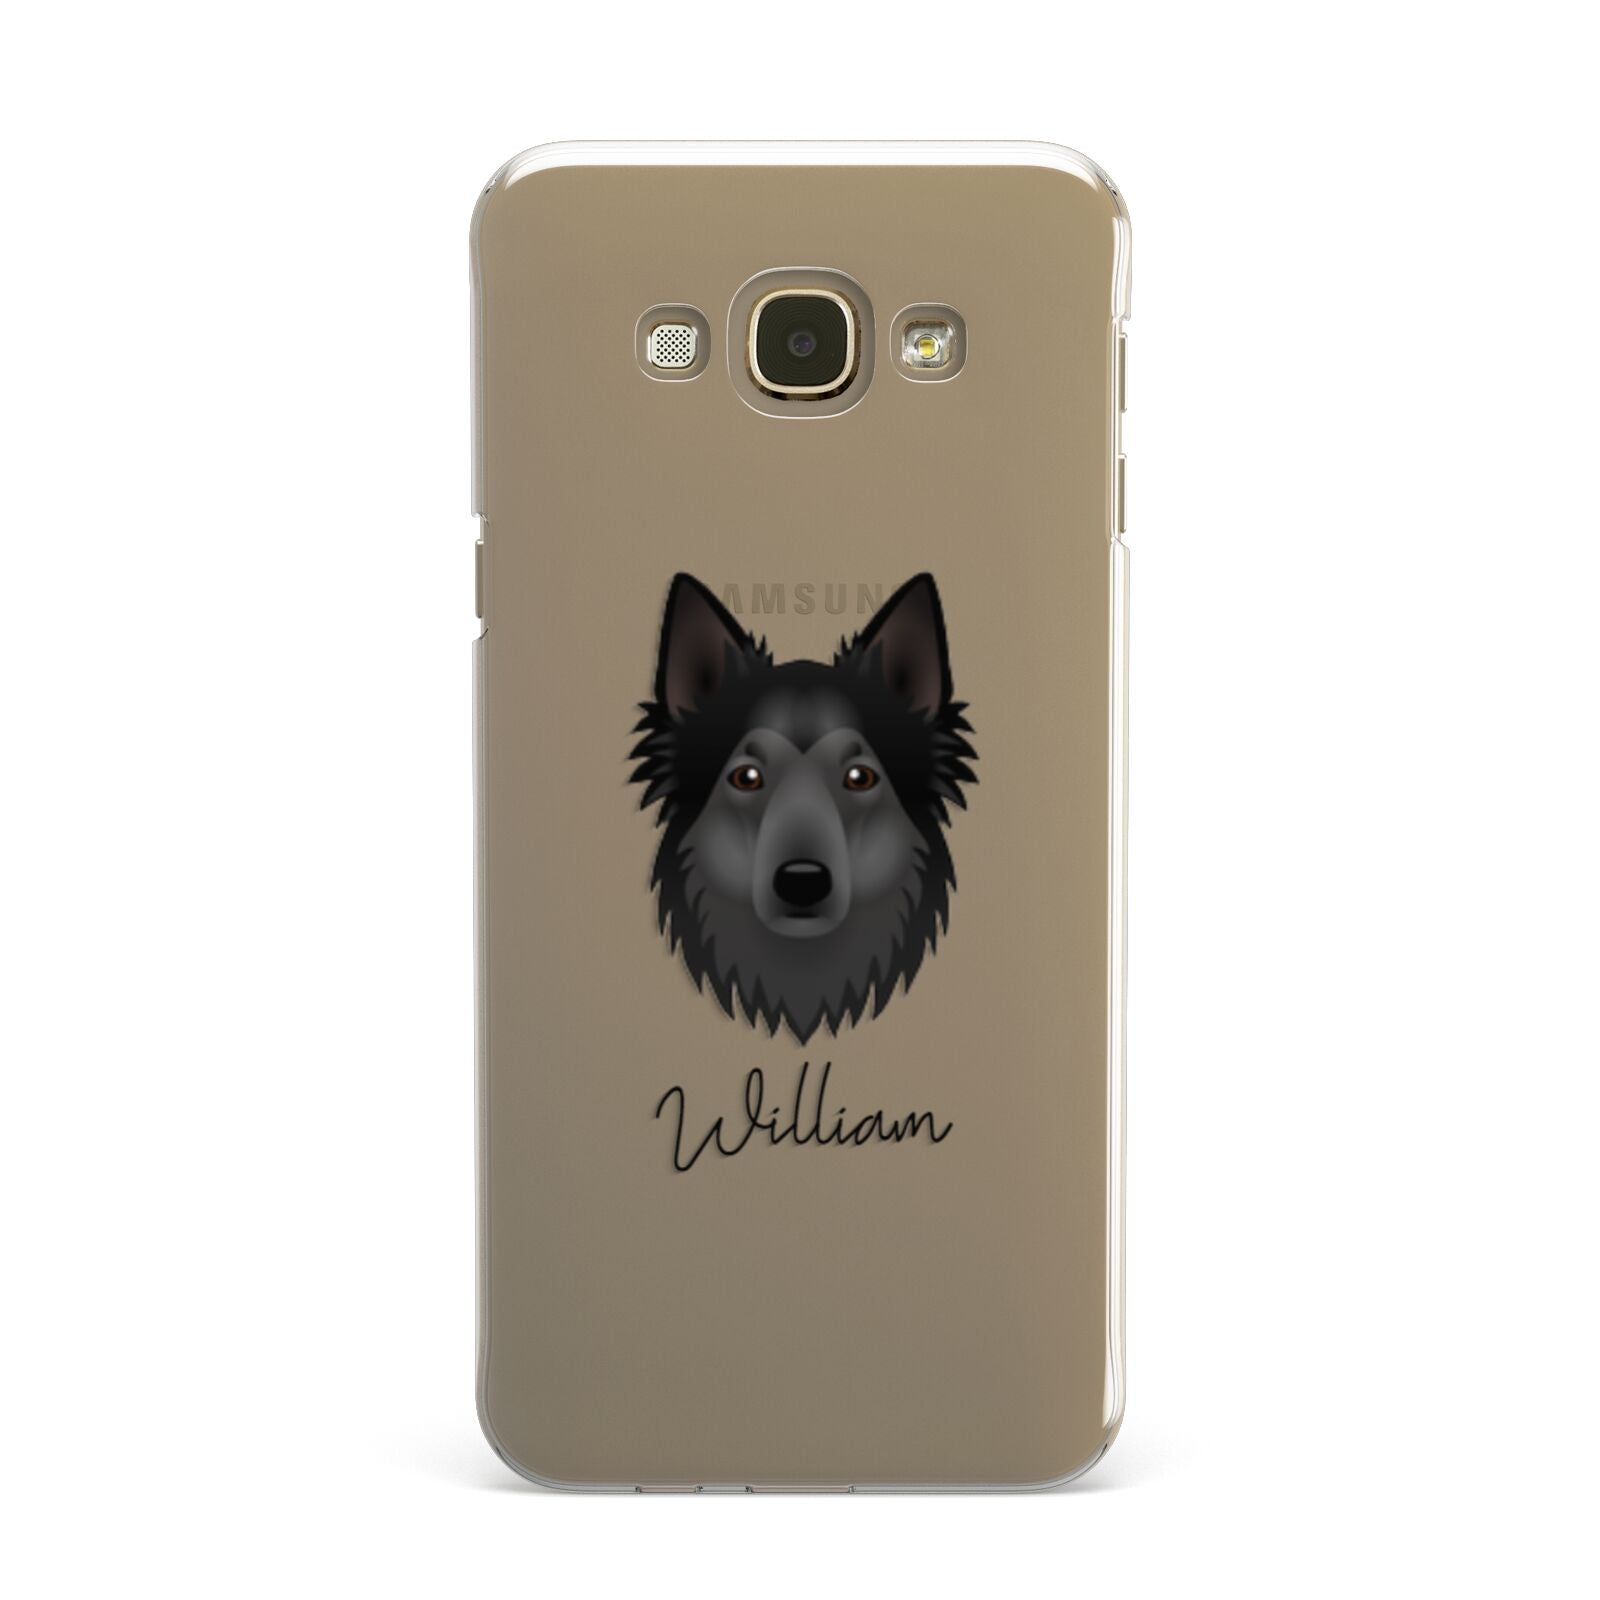 Shollie Personalised Samsung Galaxy A8 Case